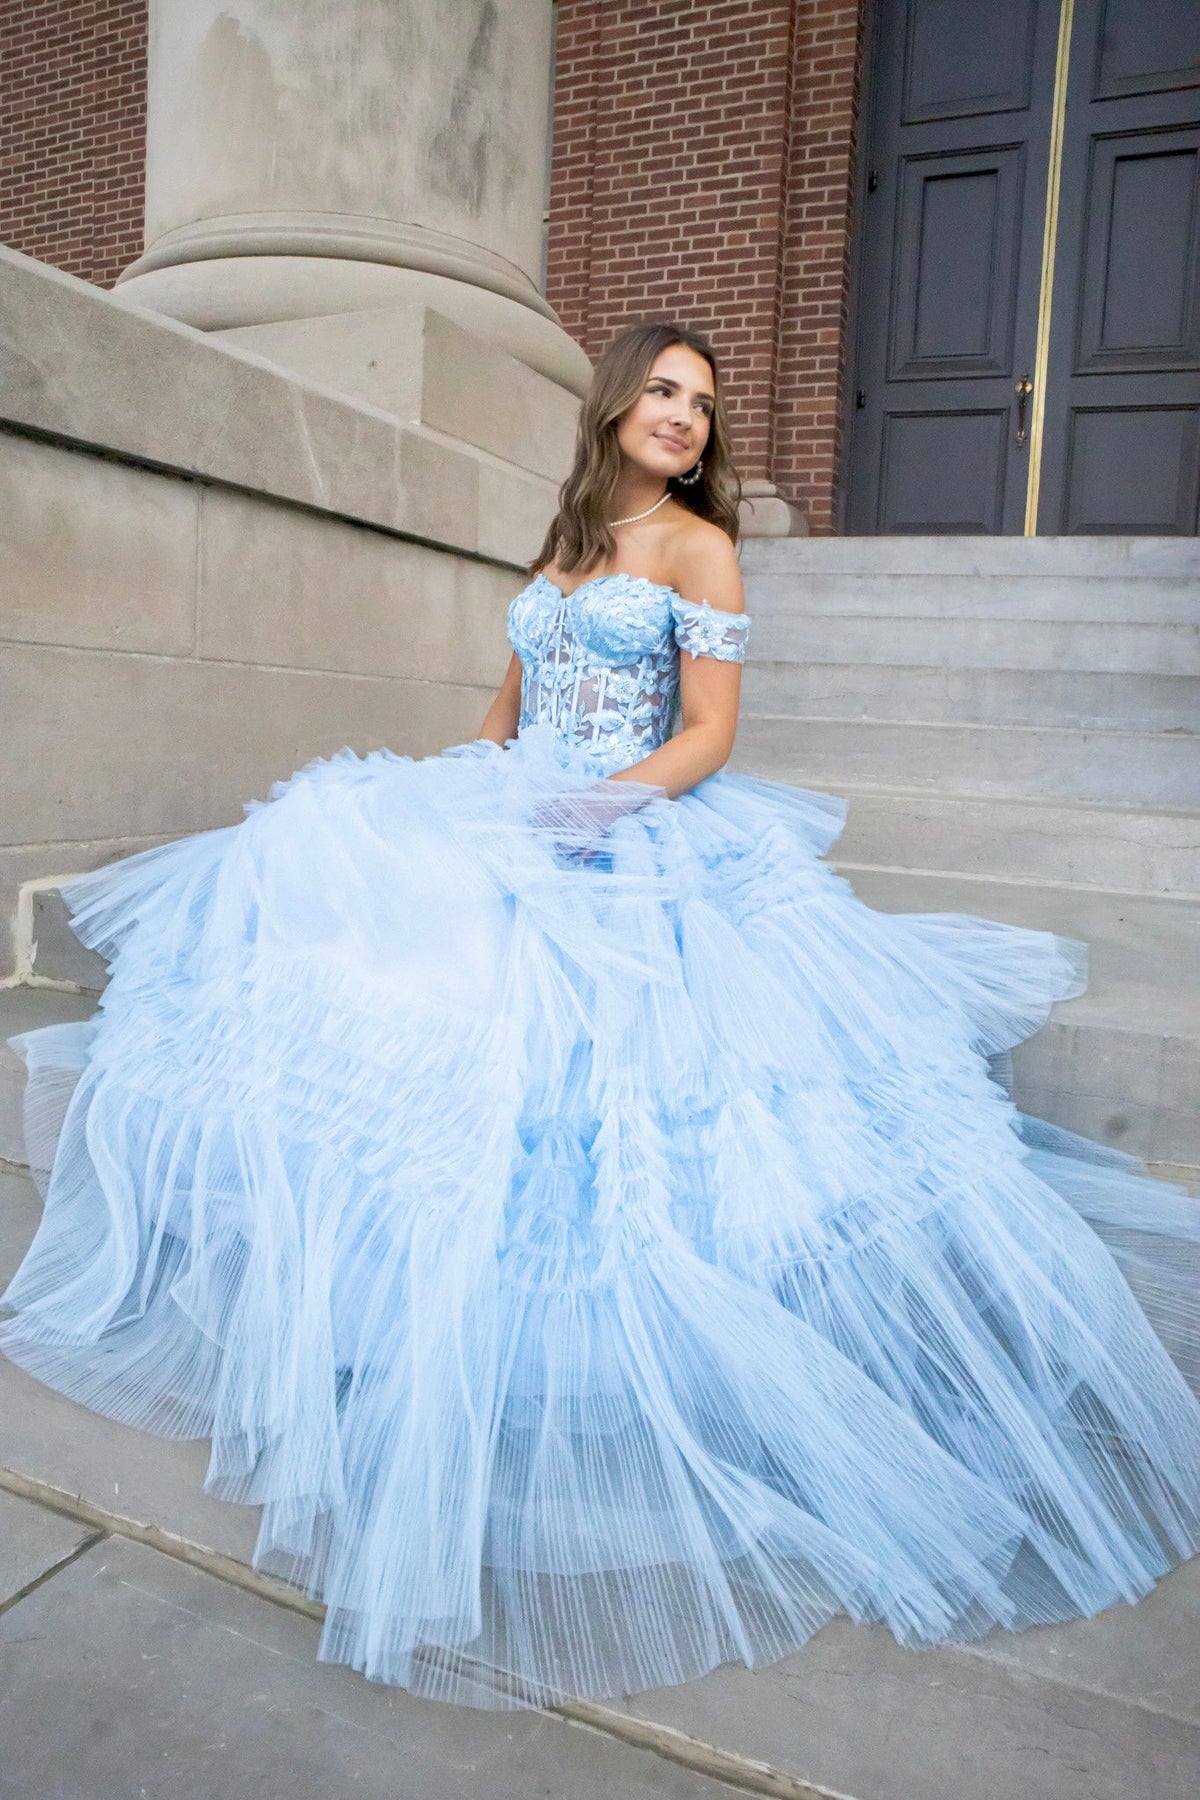 Light Blue Pleated Tulle Ball Gown-Dresses-KCoutureBoutique, women's boutique in Bossier City, Louisiana